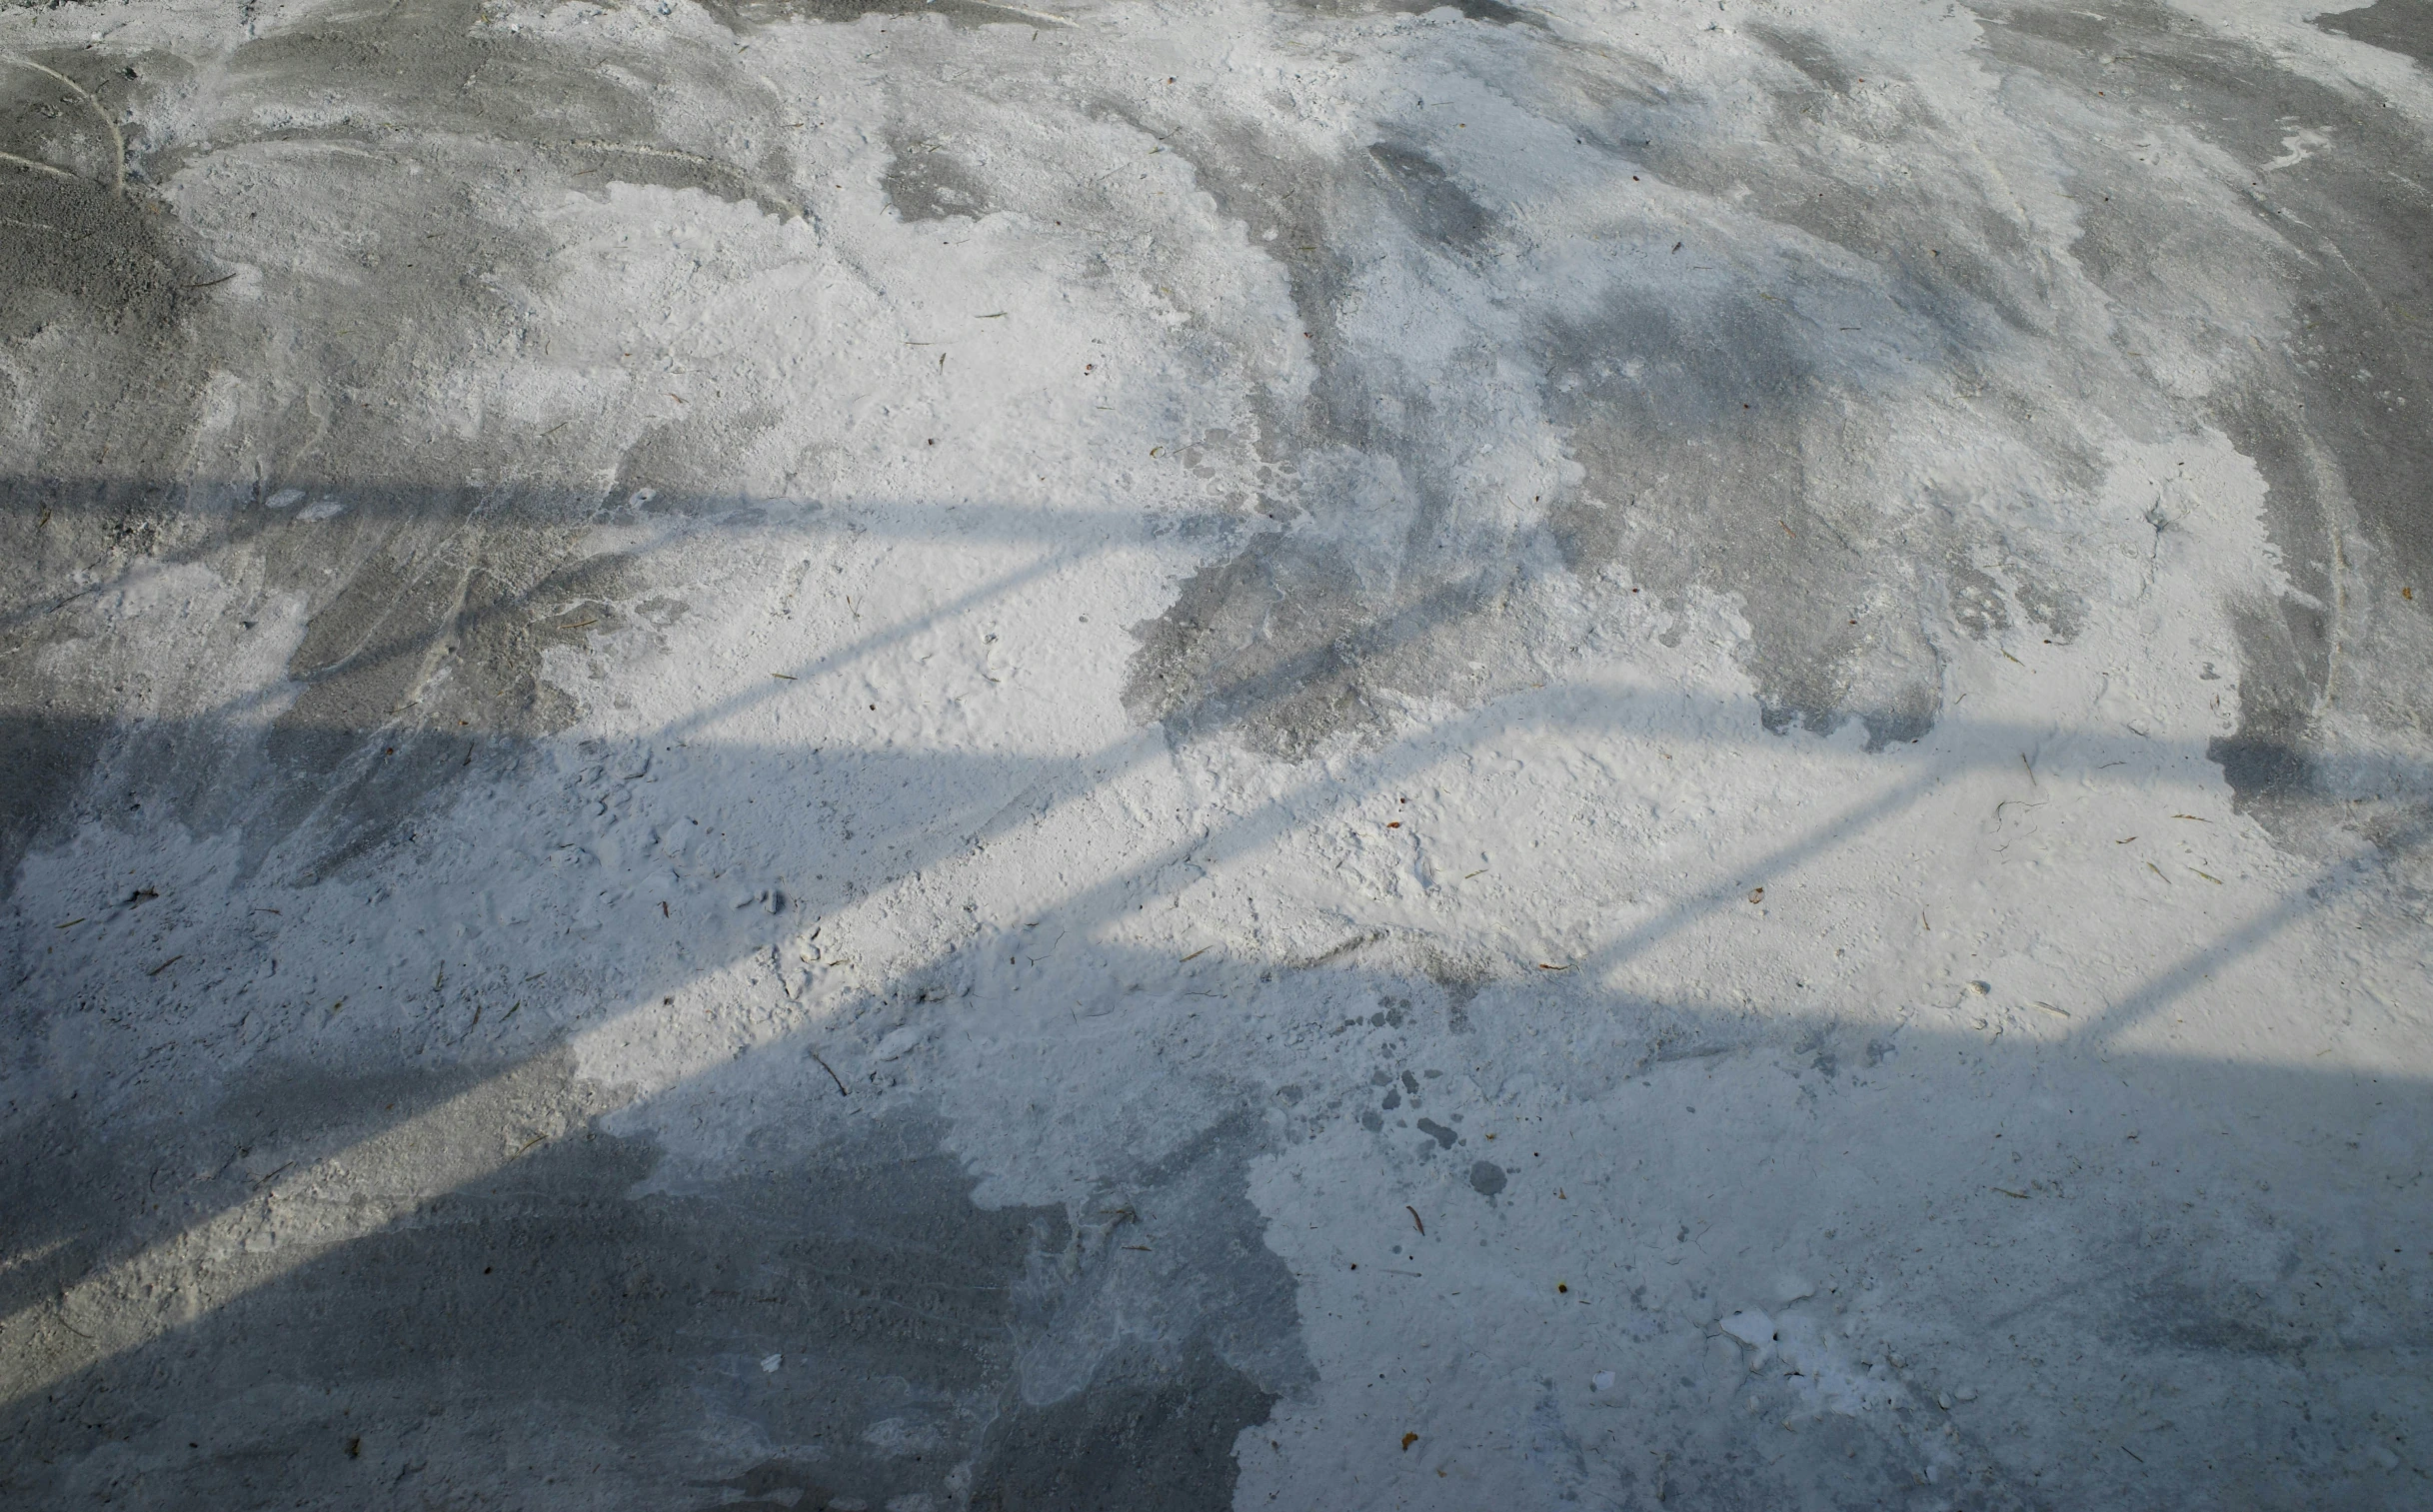 shadows and textures on the cement of a street